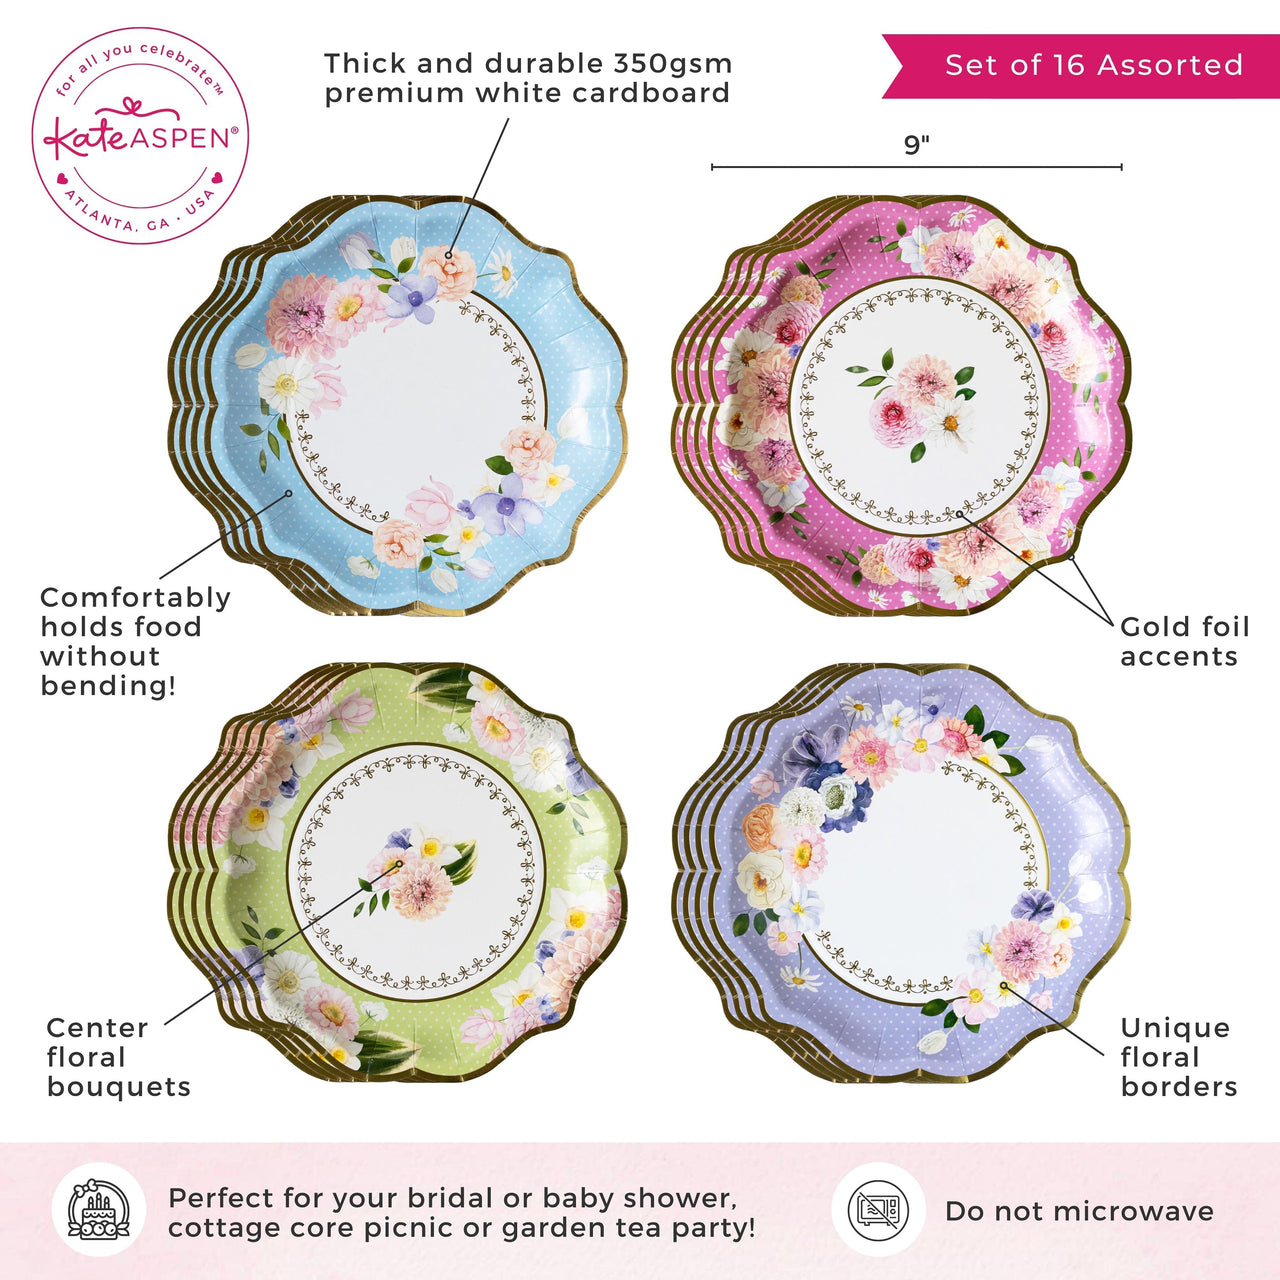 Tea Time Party 9" Premium Paper Plates - Assorted (Set of 16) Atlernate 6